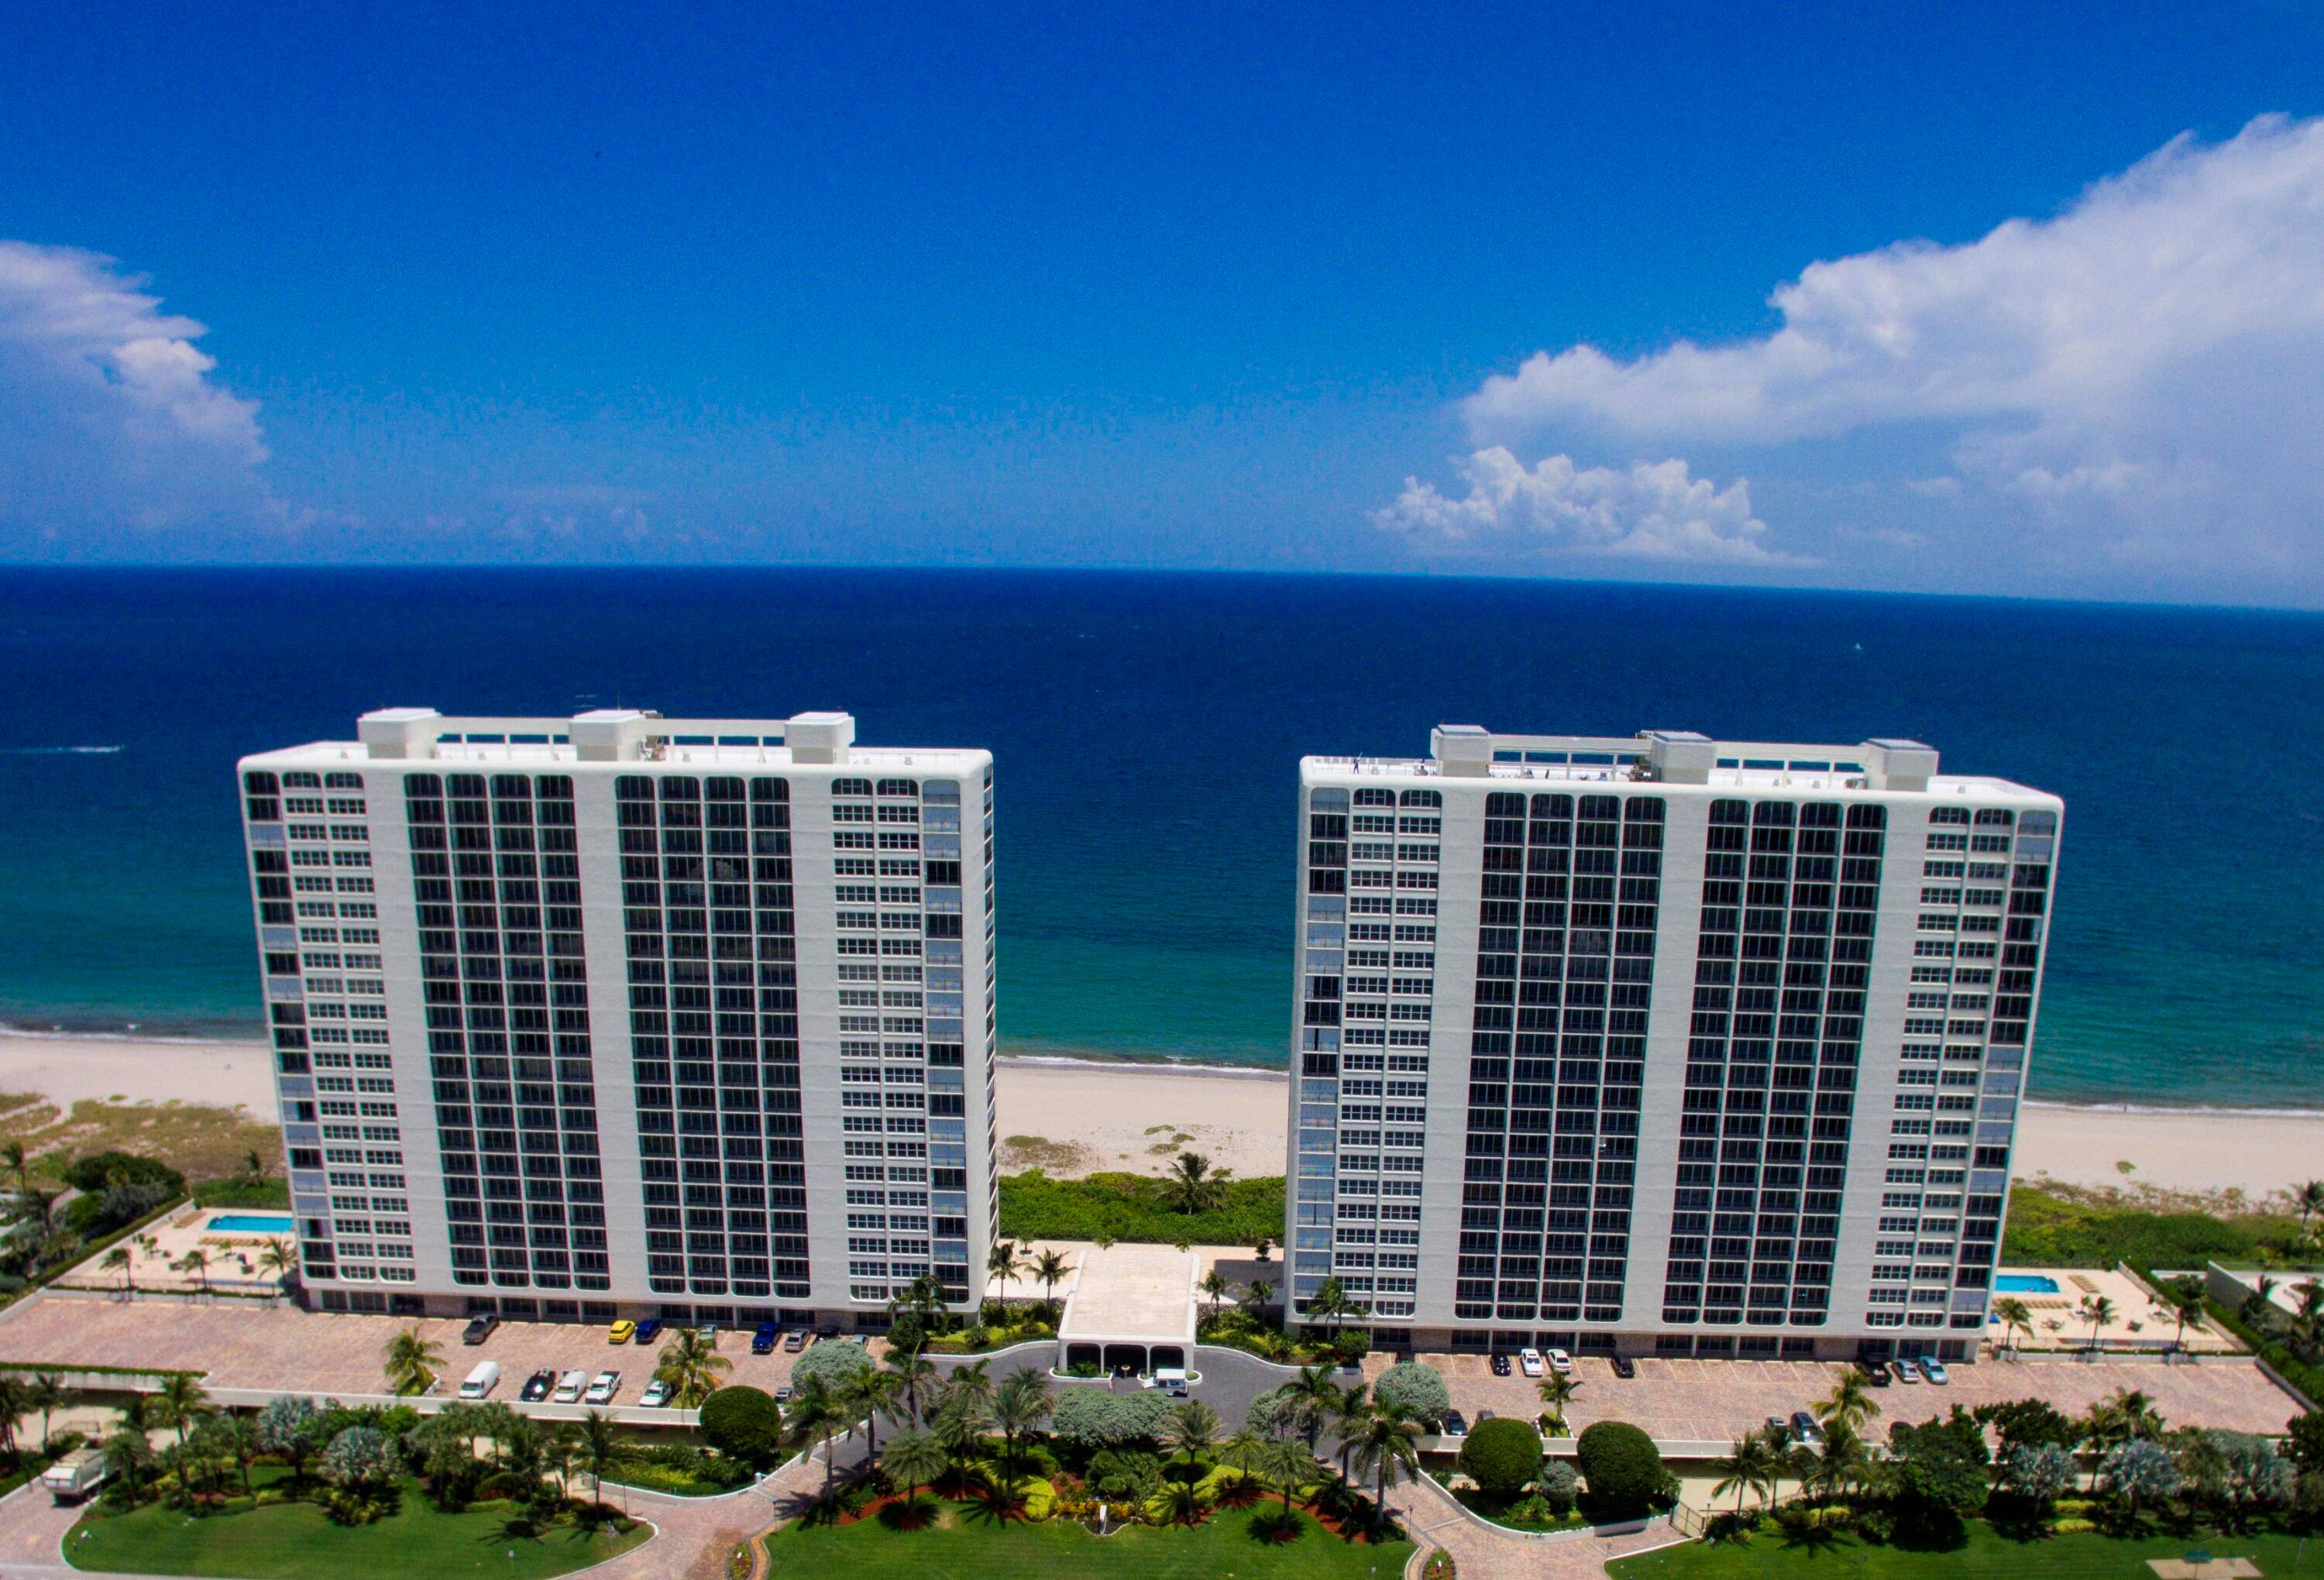 WOW, Direct, Direct, Unobstructed SOUTH EAST CORNER OCEANFRONT Apartment Forever OCEAN Views Walk up possible to avoid Elevator Use SECOND Floor with the feel of a HOME ON THE OCEAN ...